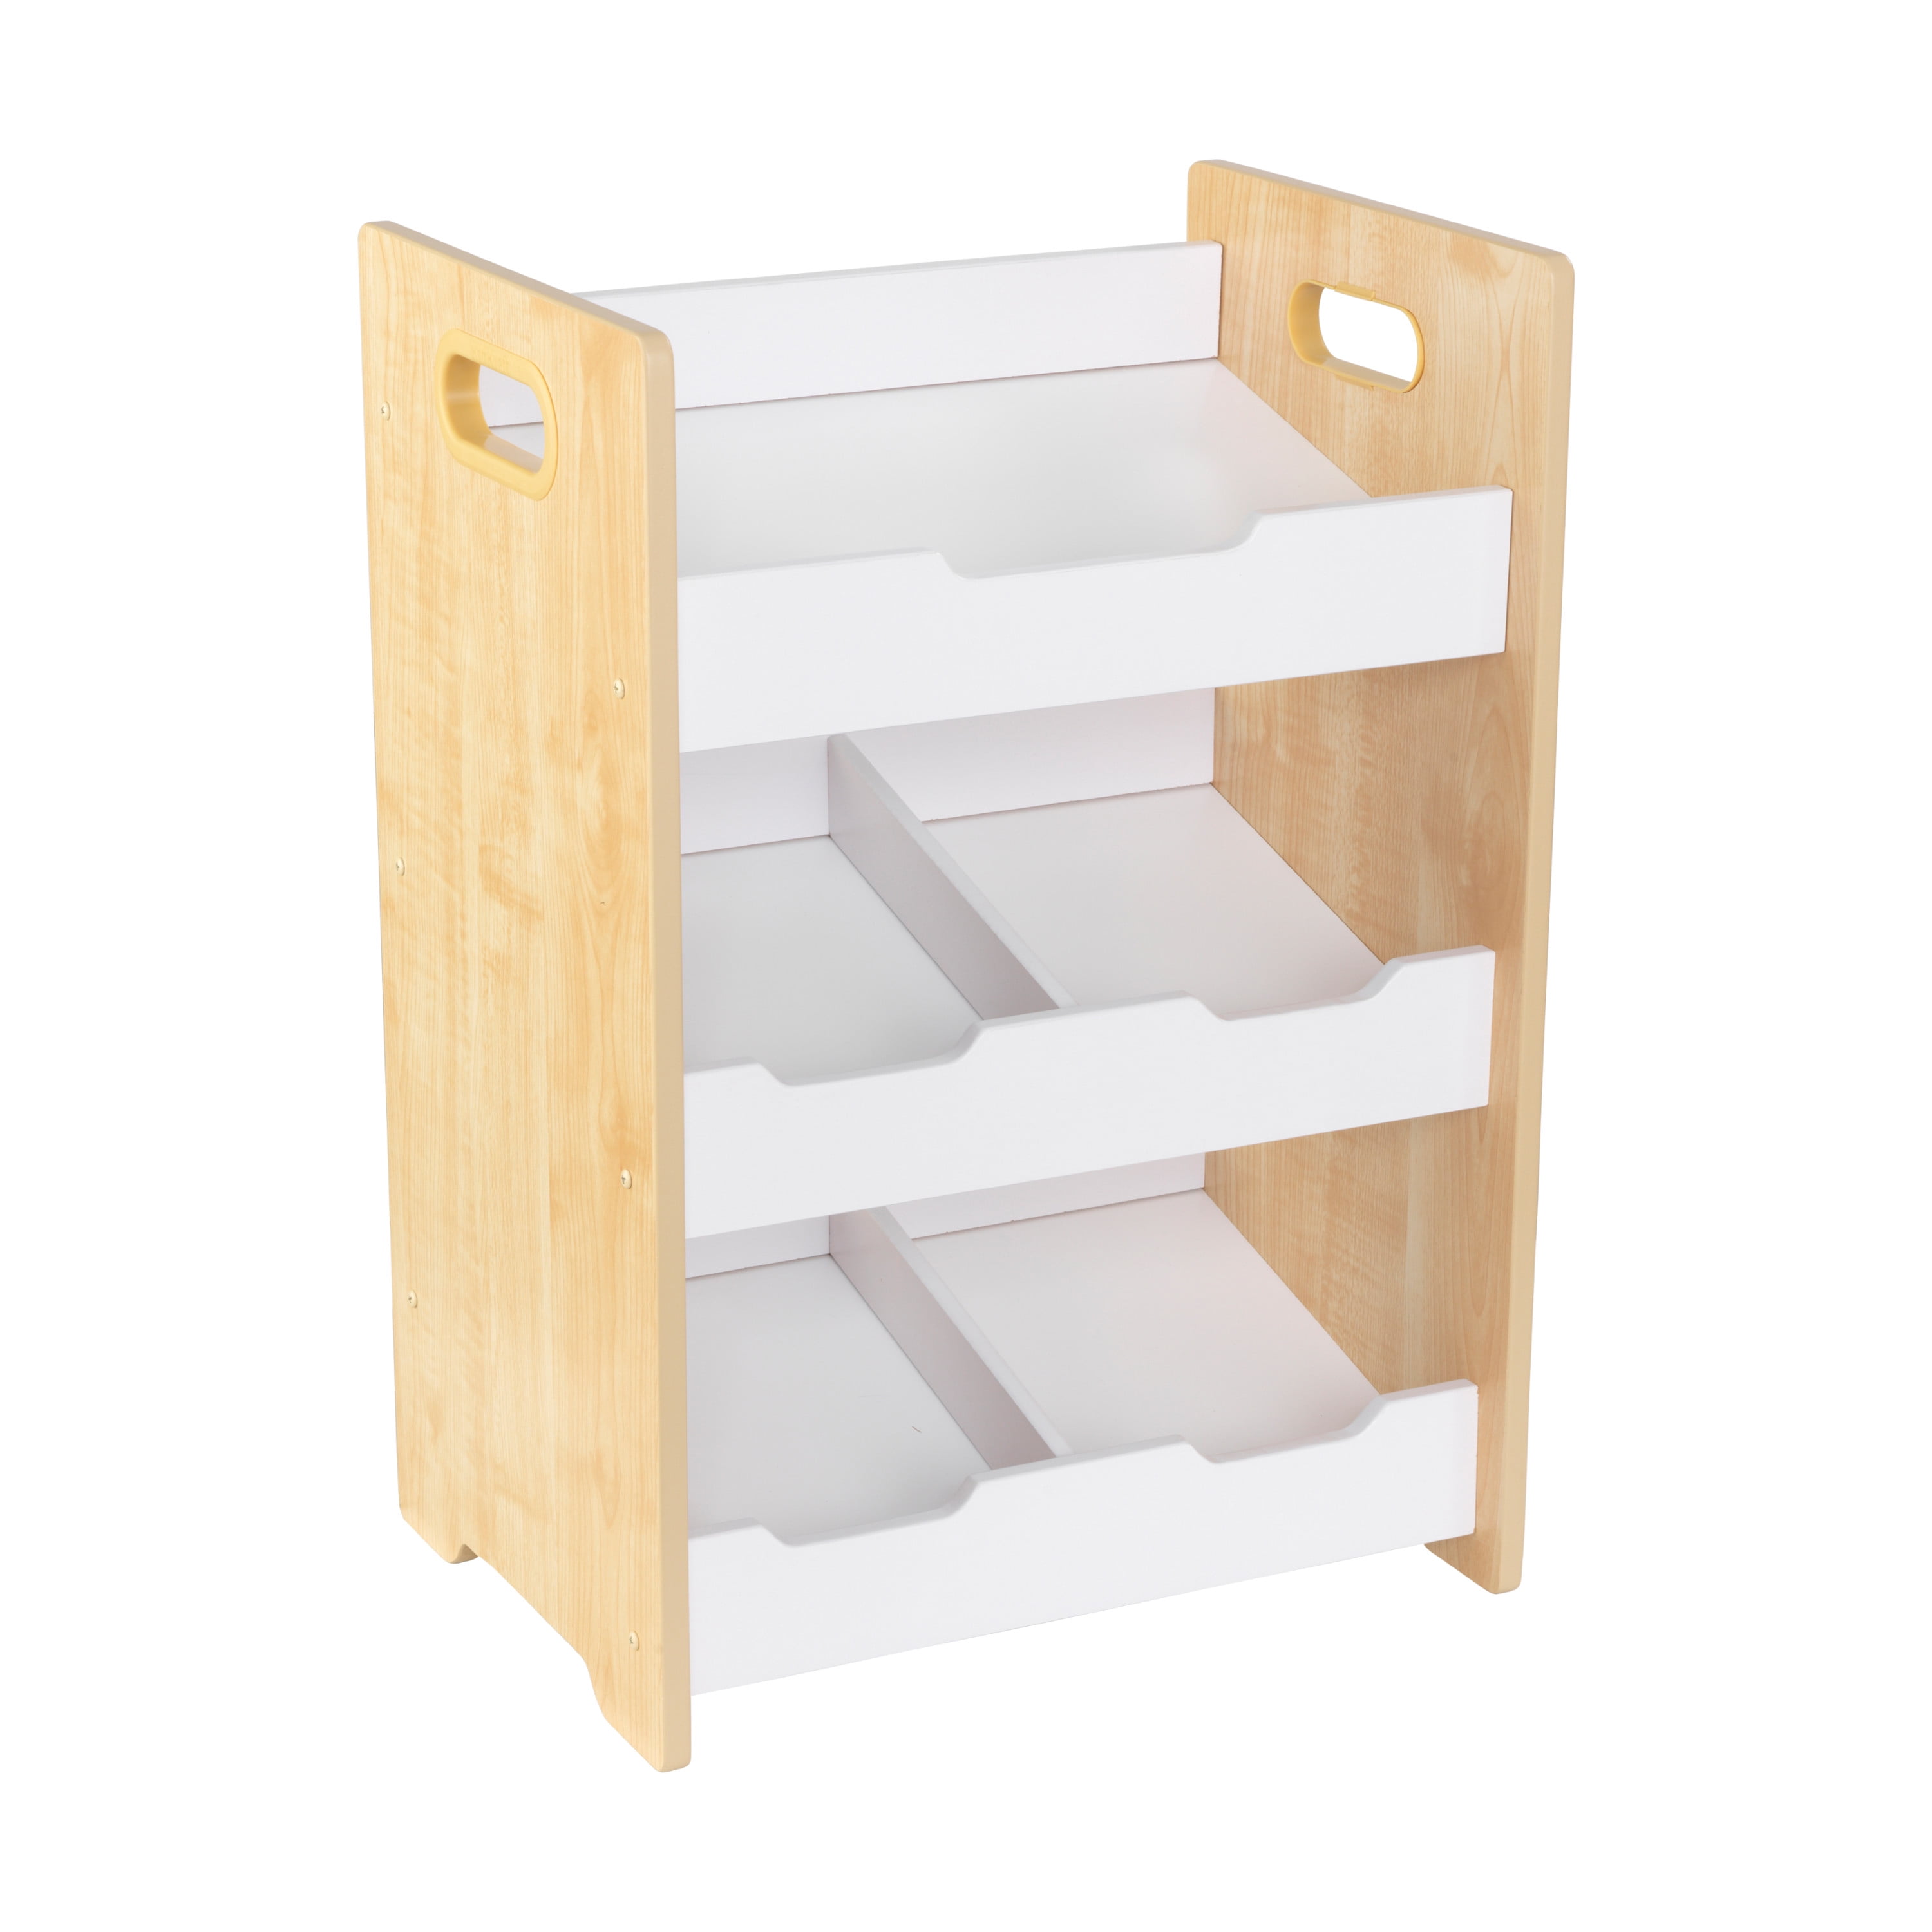 KidKraft Wooden Angled Bin Unit with Five Compartments, Natural & White -  Walmart.com